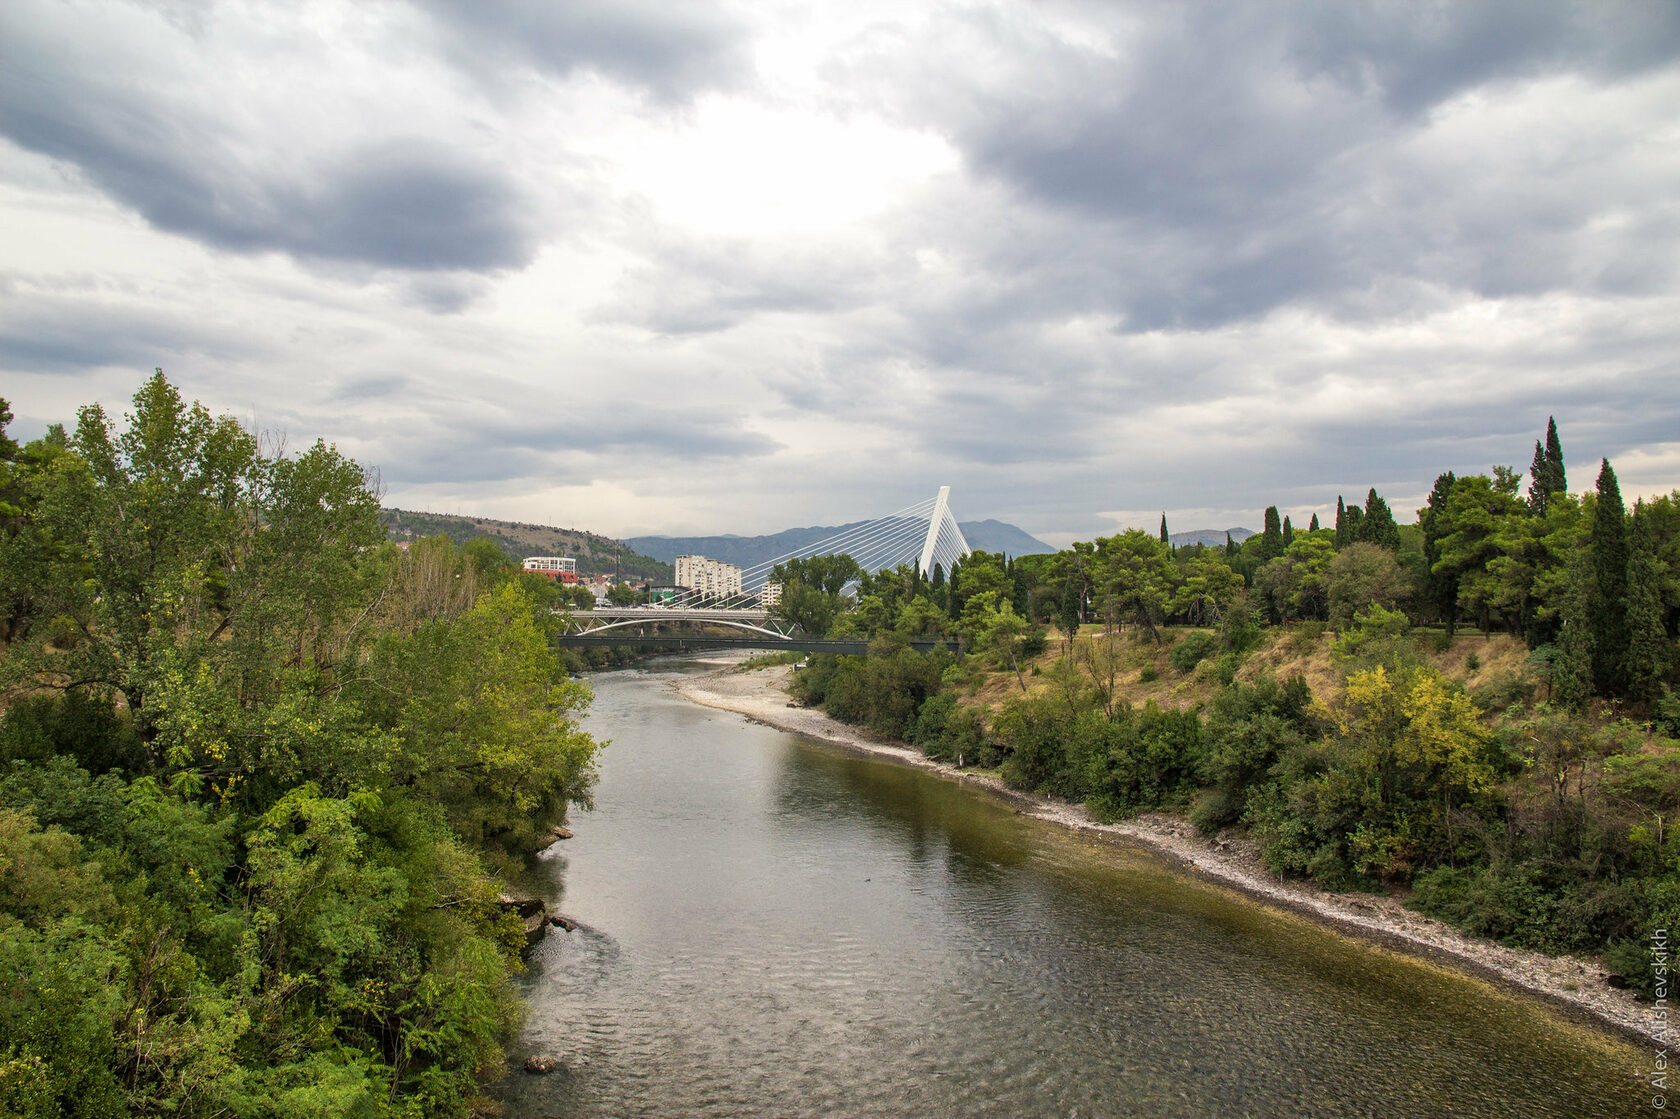 A view of the Moraca River in Podgorica Montenegro